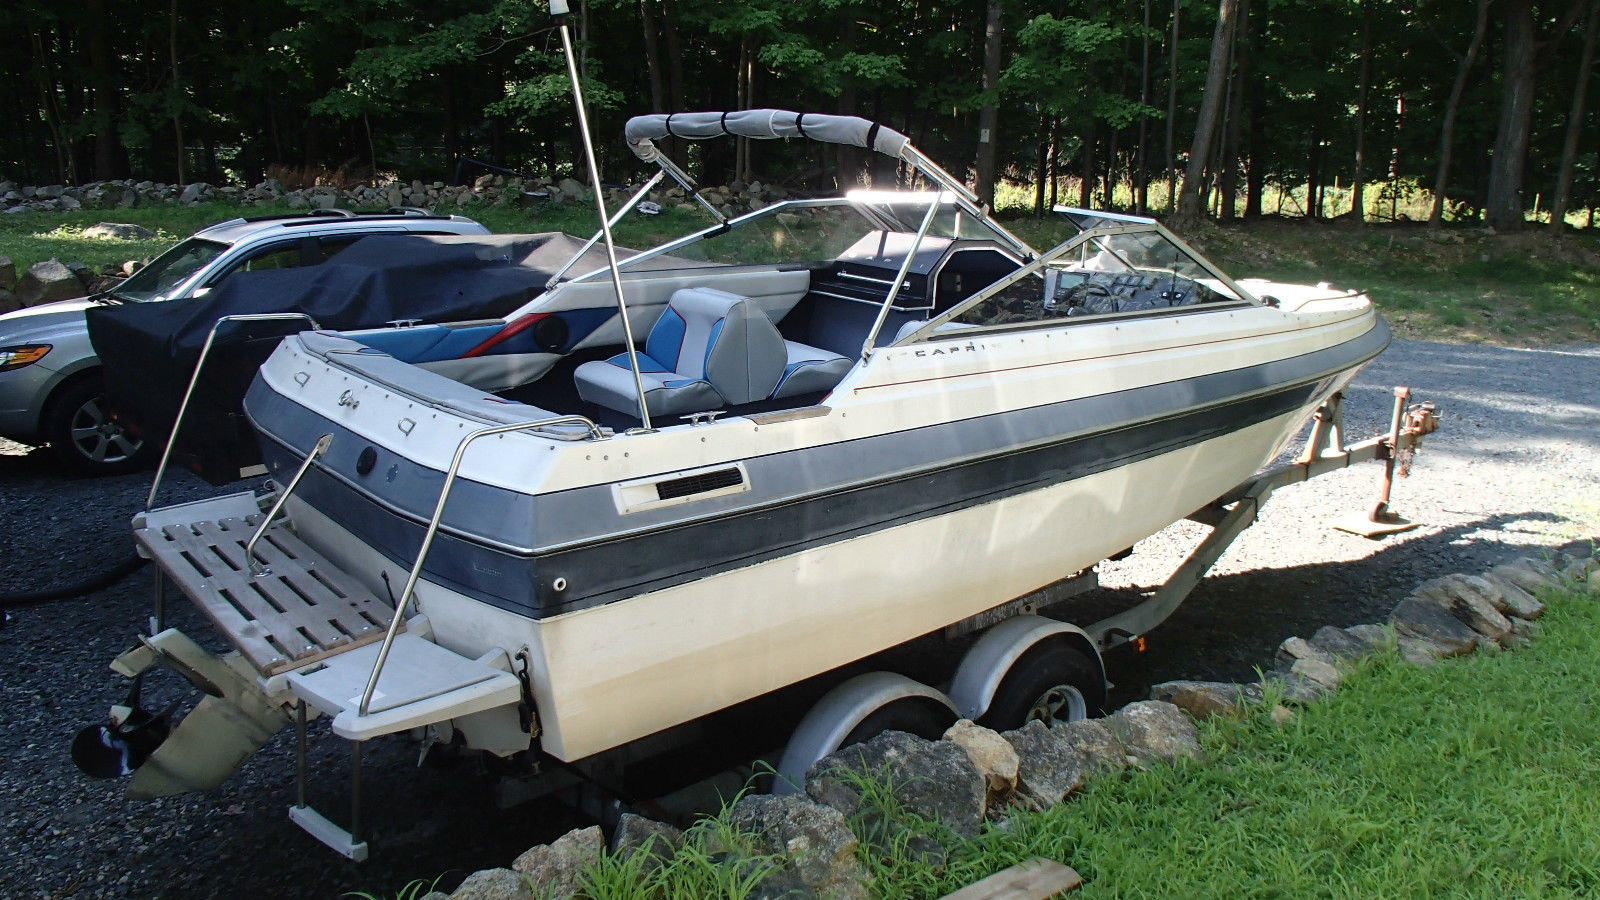 Bayliner Capri 2150 1986 for sale for $2,700 - Boats-from 